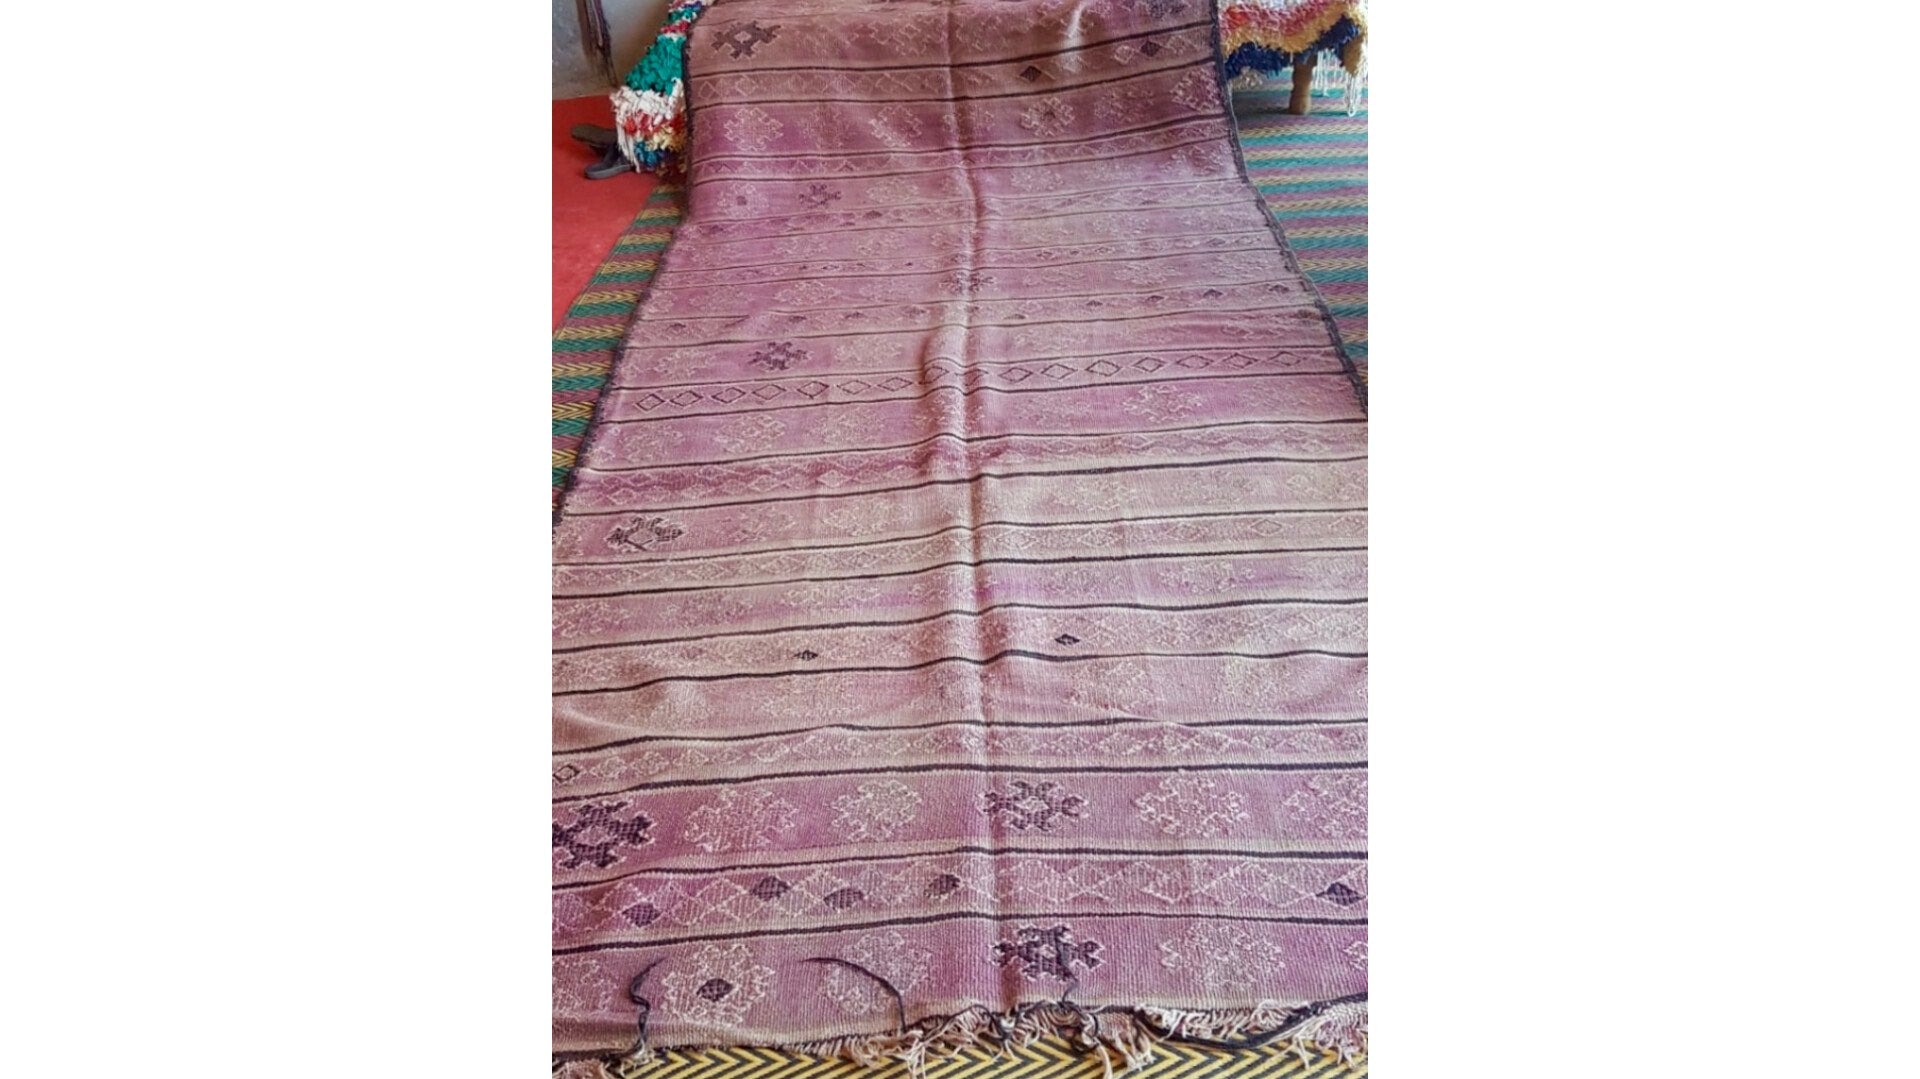 Purple vintage Kilim rug that used for our customized Fluffikon wool dog beds / cats beds.